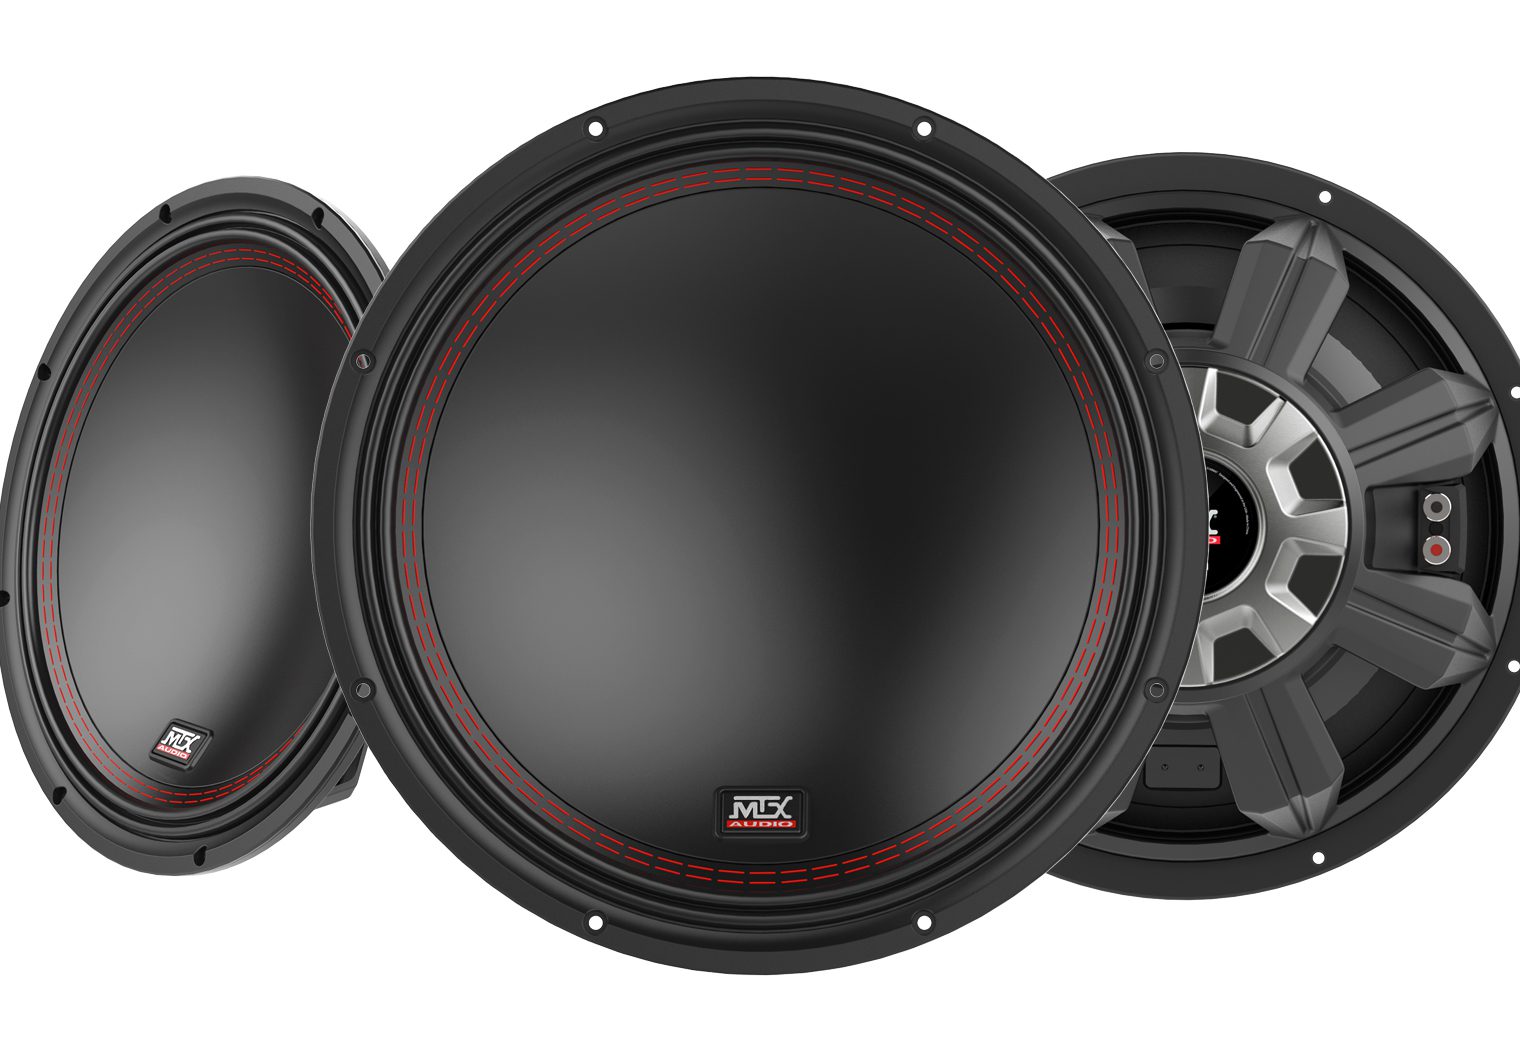 MTX 55 Series Subwoofer Review